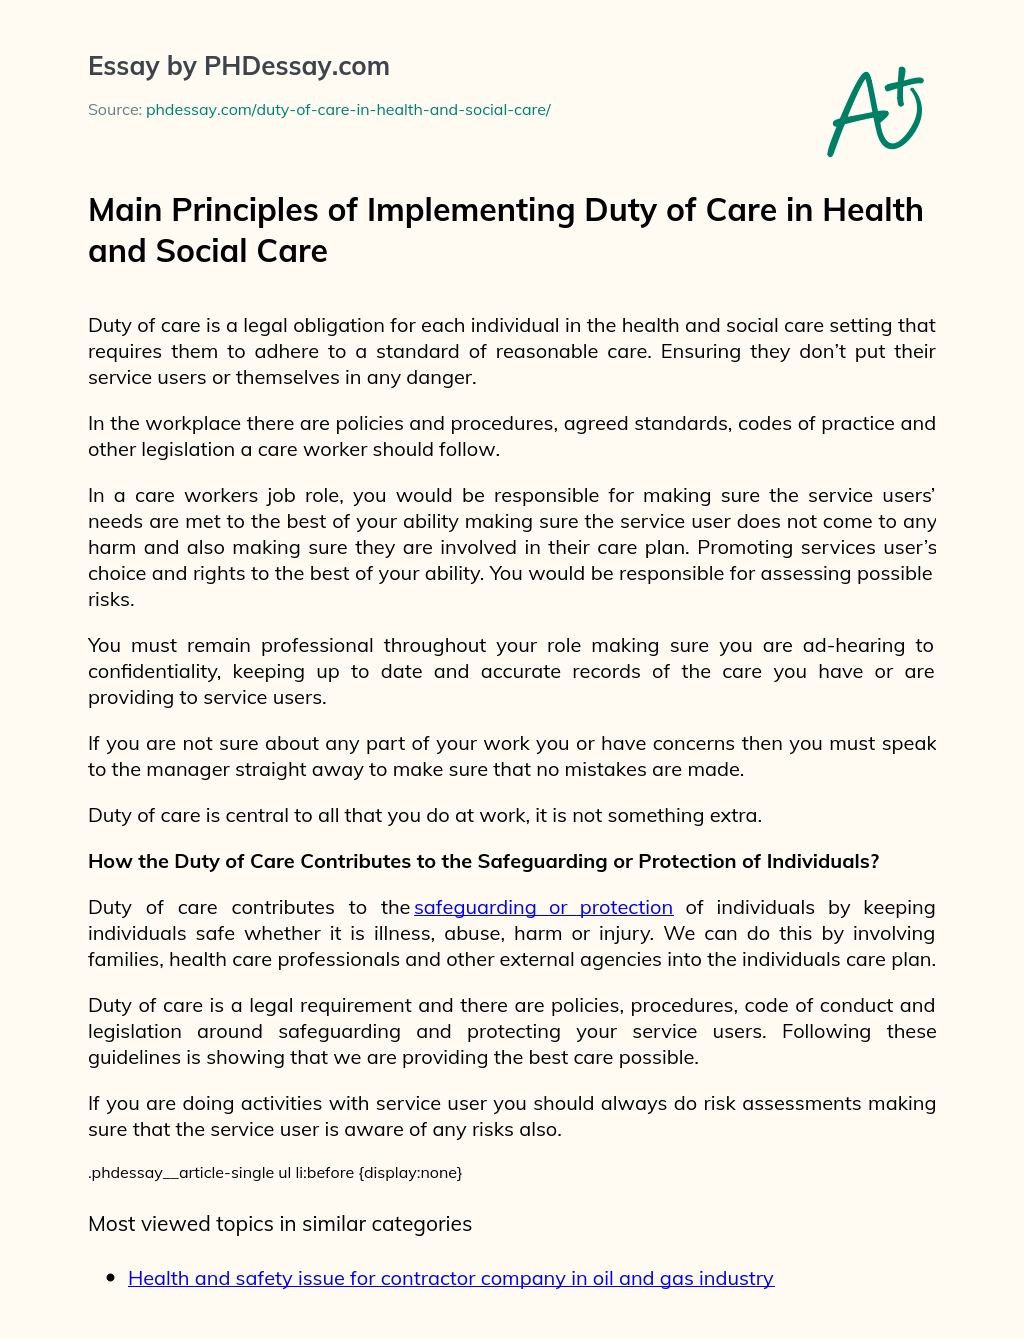 Main Principles of Implementing Duty of Care in Health and Social Care essay